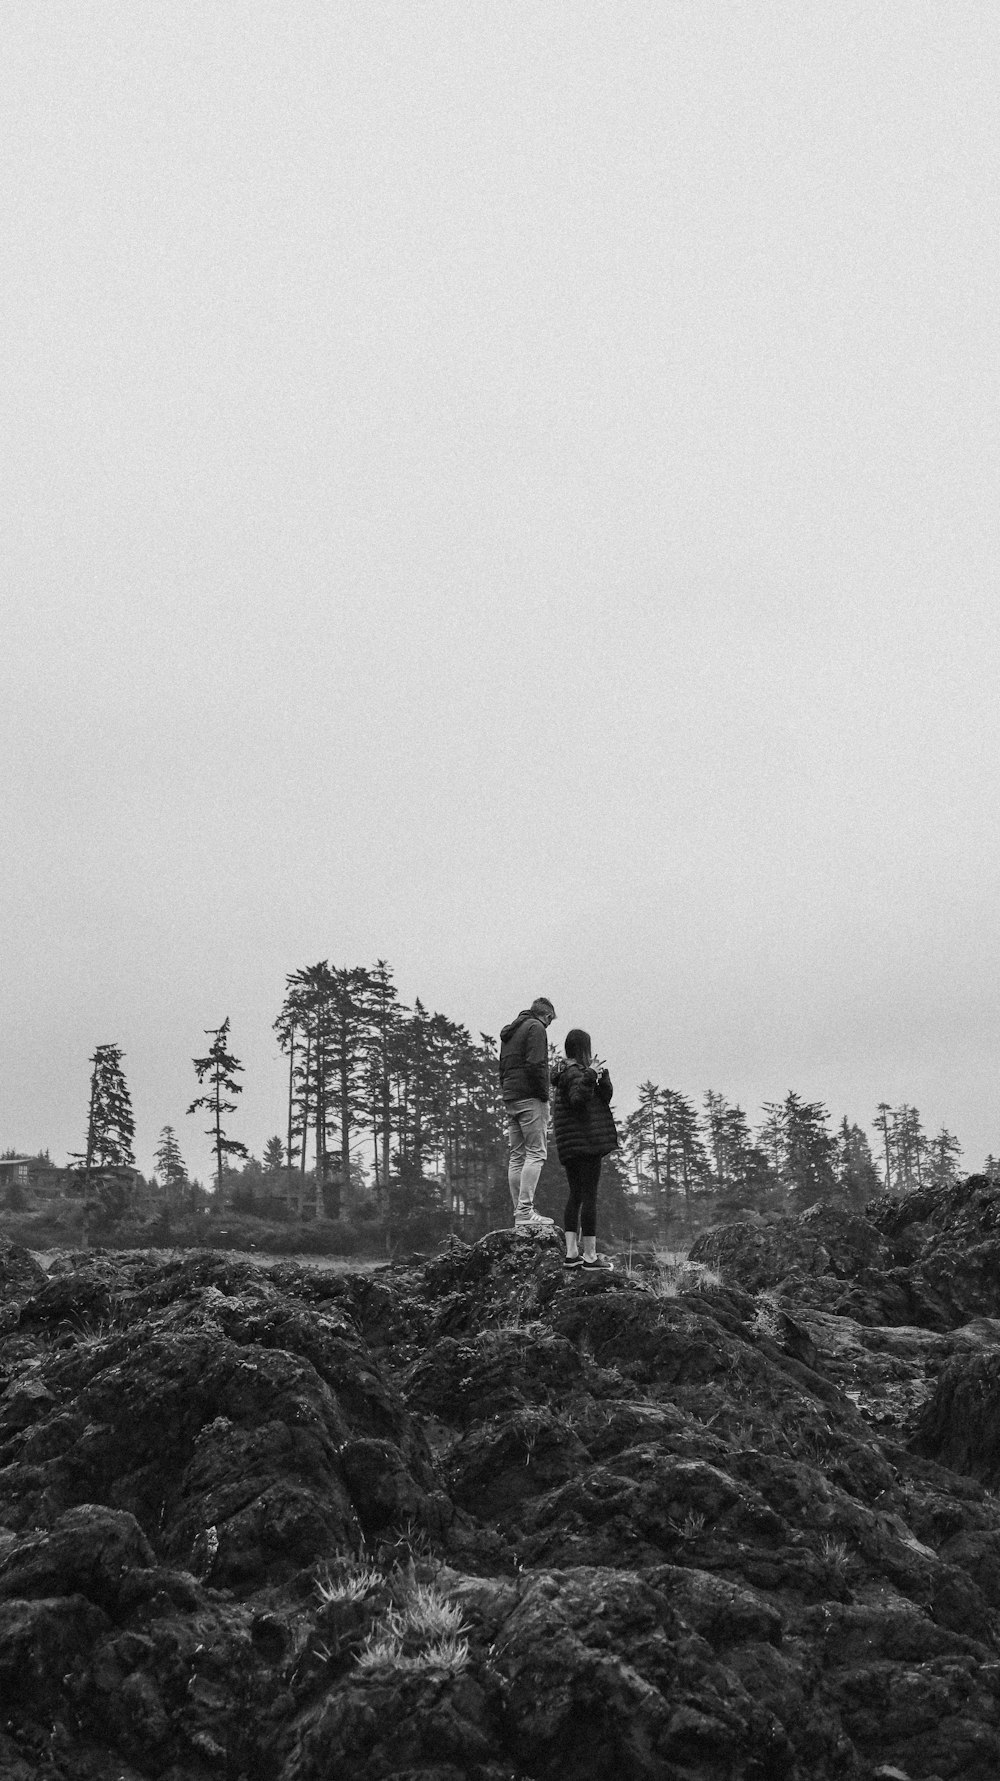 grayscale photo of 2 men standing on rock